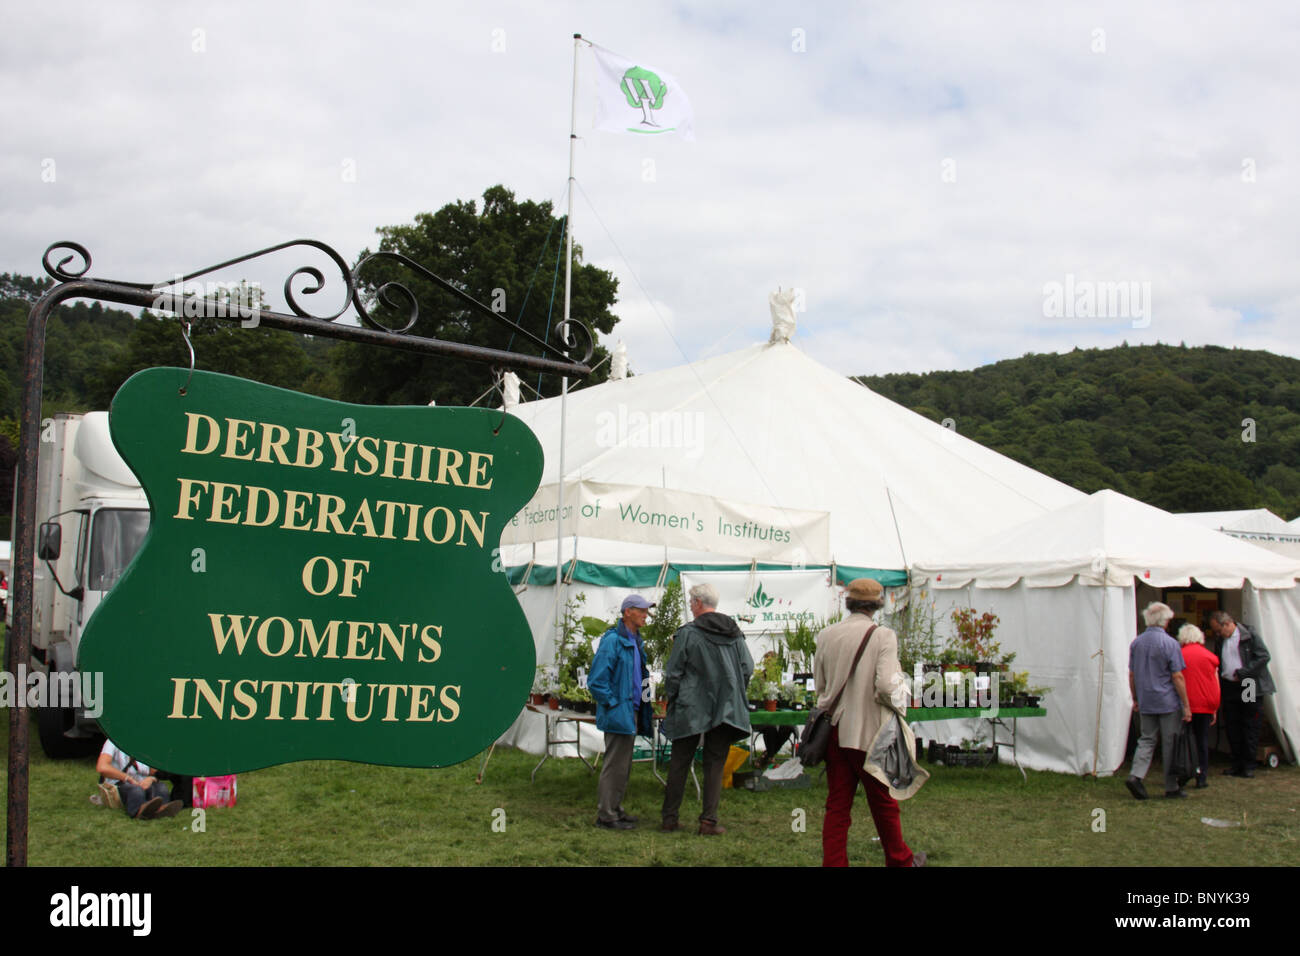 The Women's Institute (W.I.) stall at the Bakewell Show, Bakewell, Derbyshire, England, U.K. Stock Photo